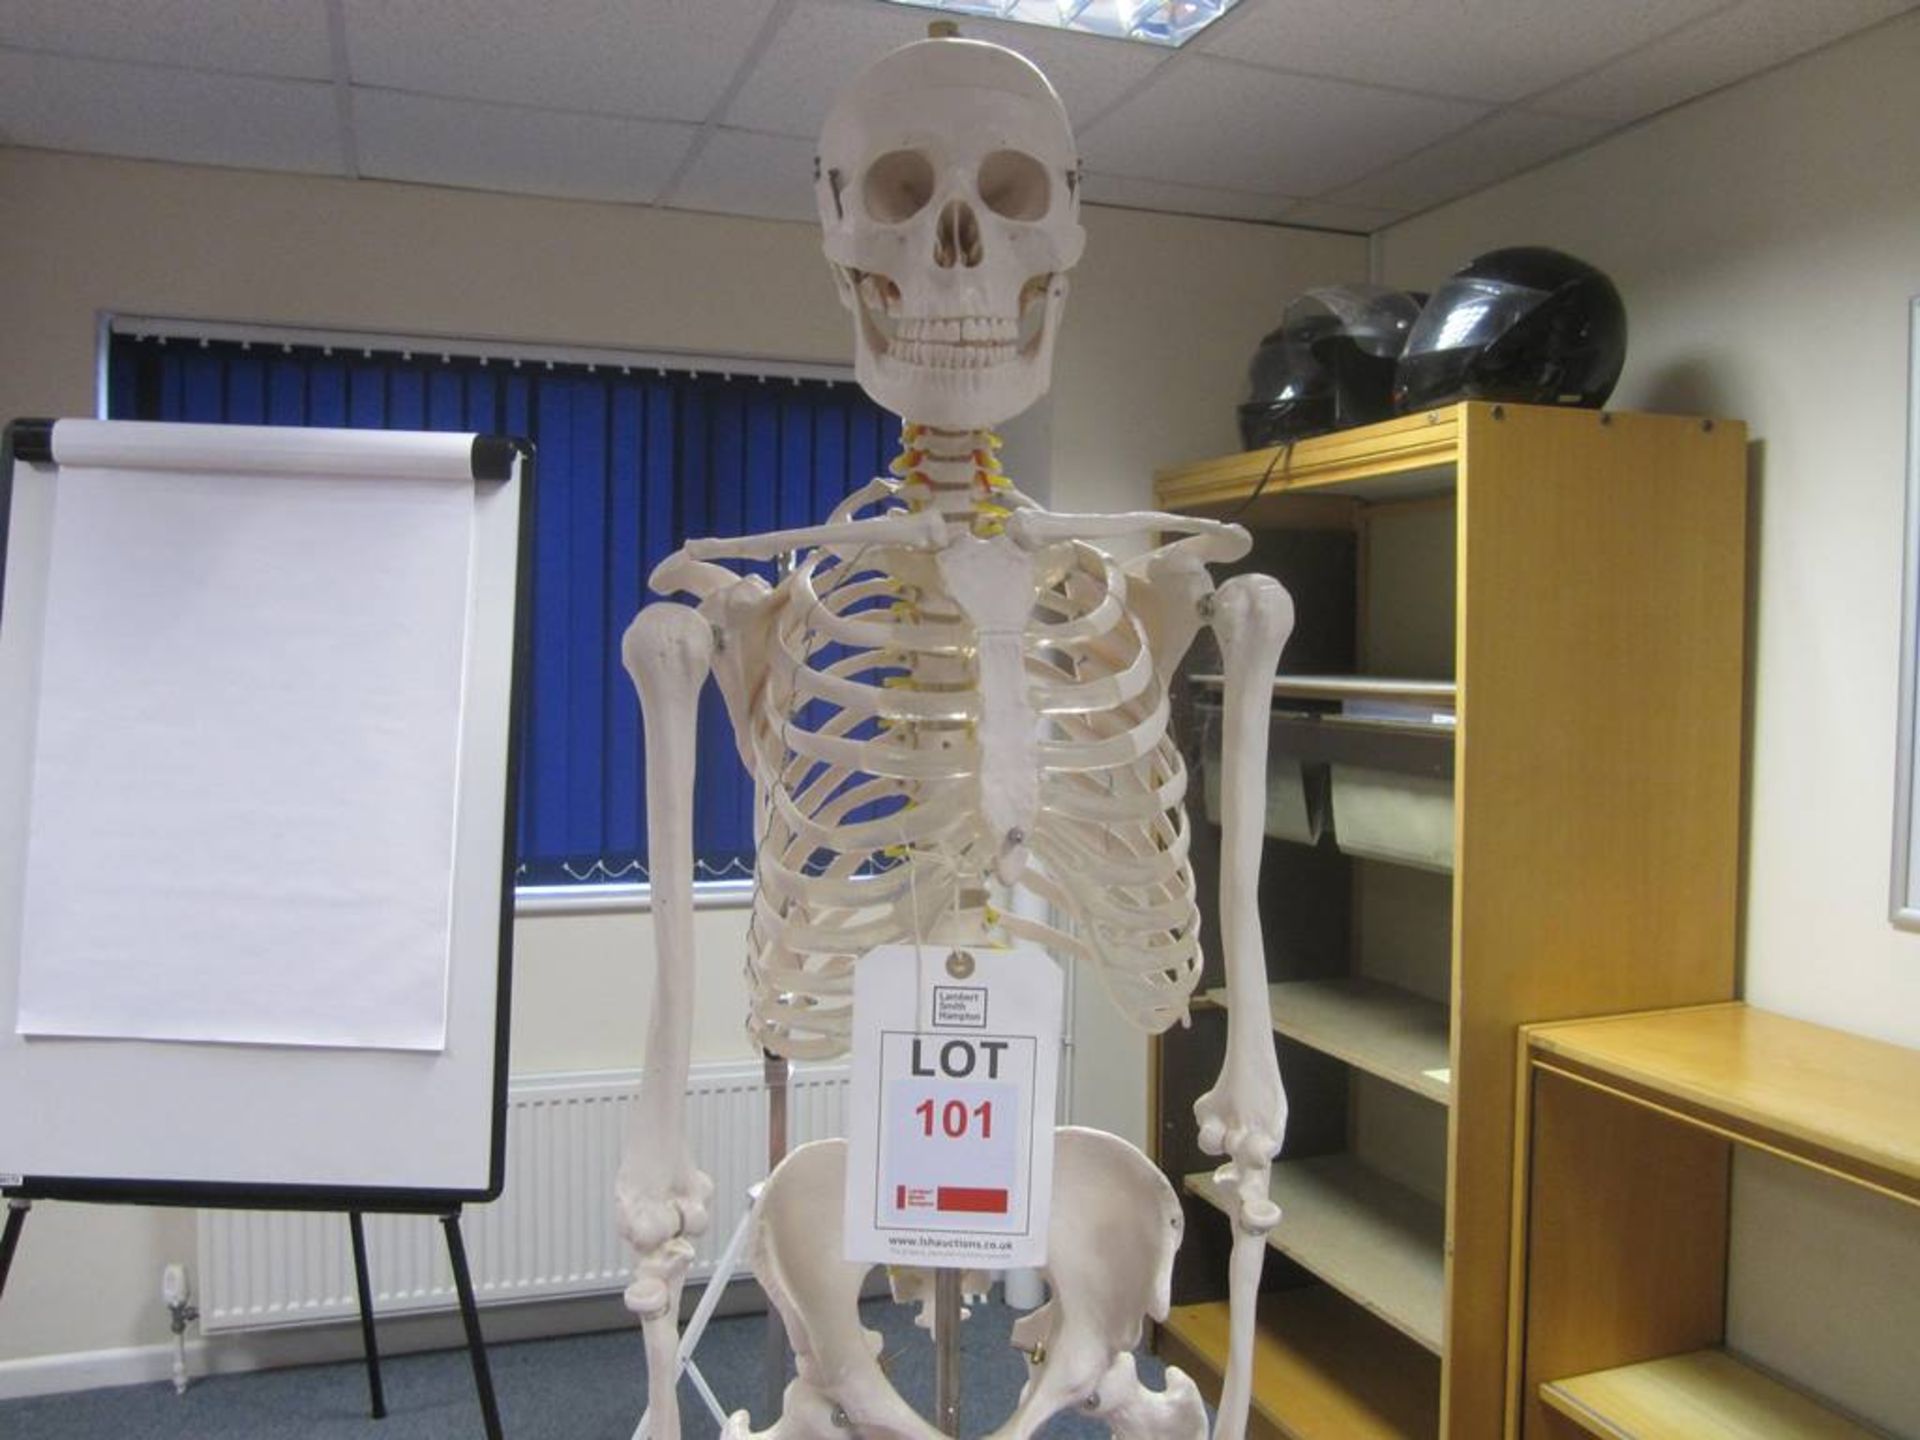 First Aid training model of human skeleton mounted on mobile stand